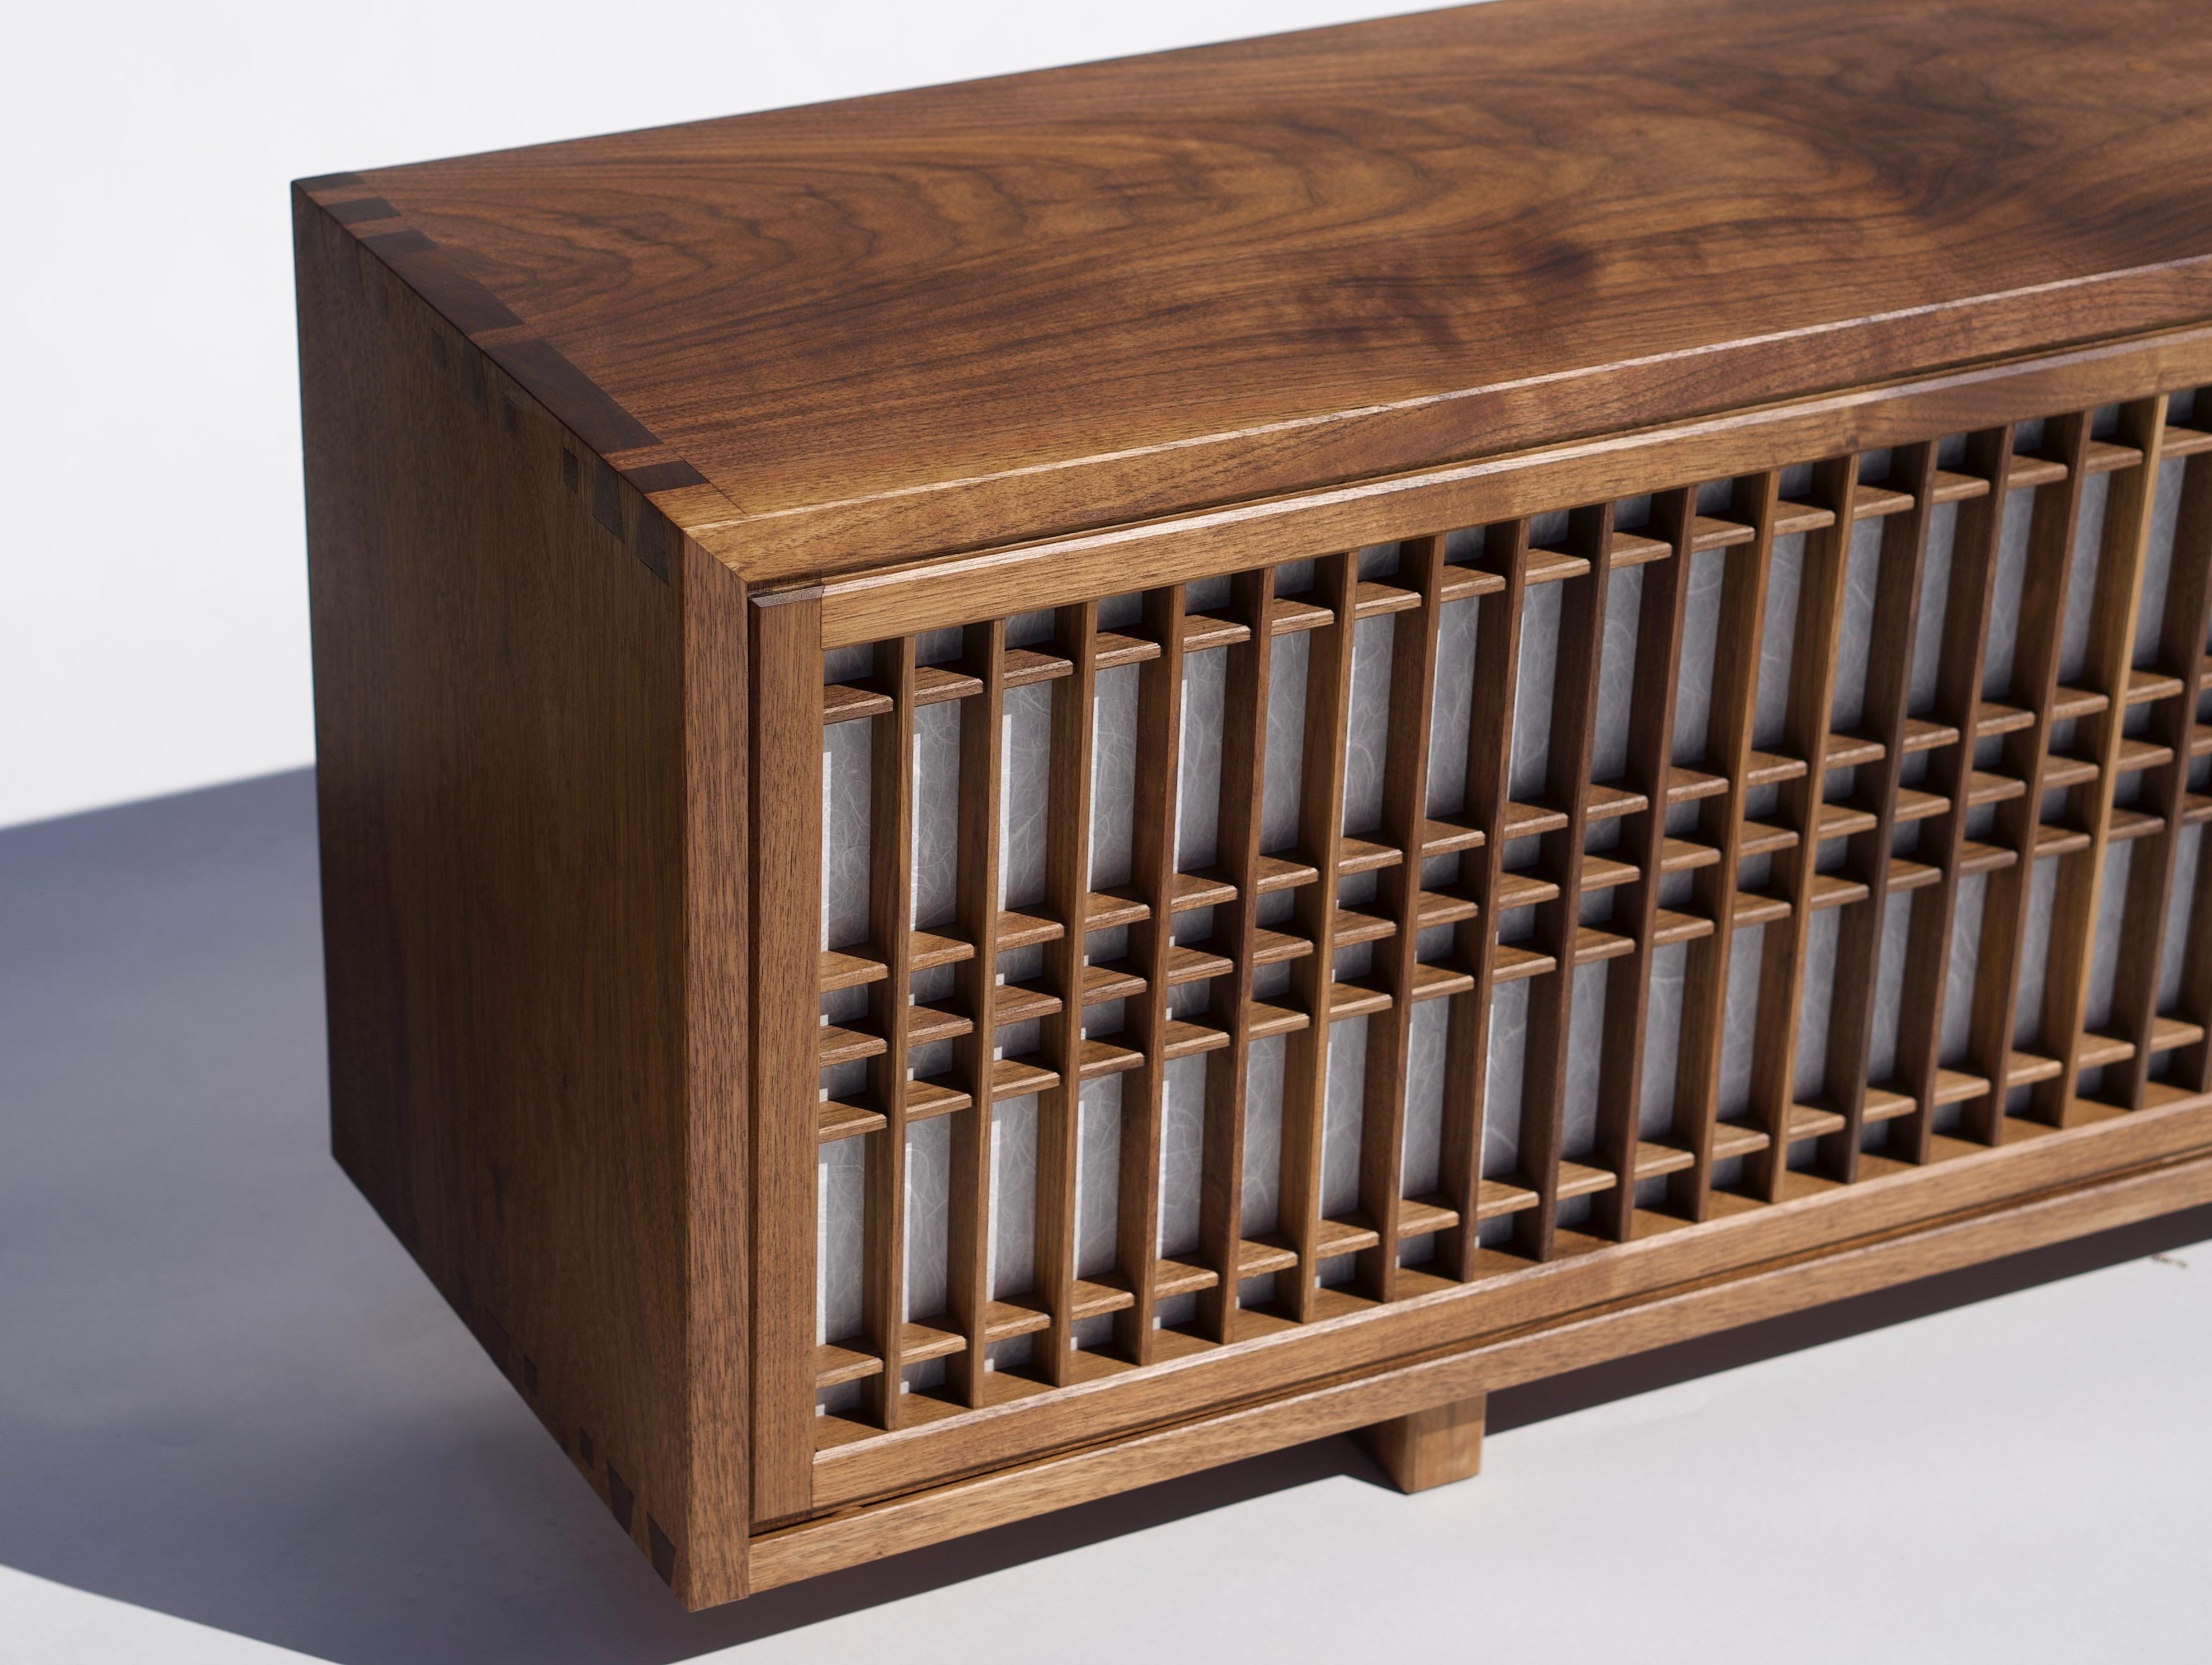 Walnut cabinet made by hand and featuring shoji doors and shelves. This cabinet is constructed utilizing time honored joinery techniques featured in Japanese temple carpentry in addition it features shoji made utilizing those same traditional